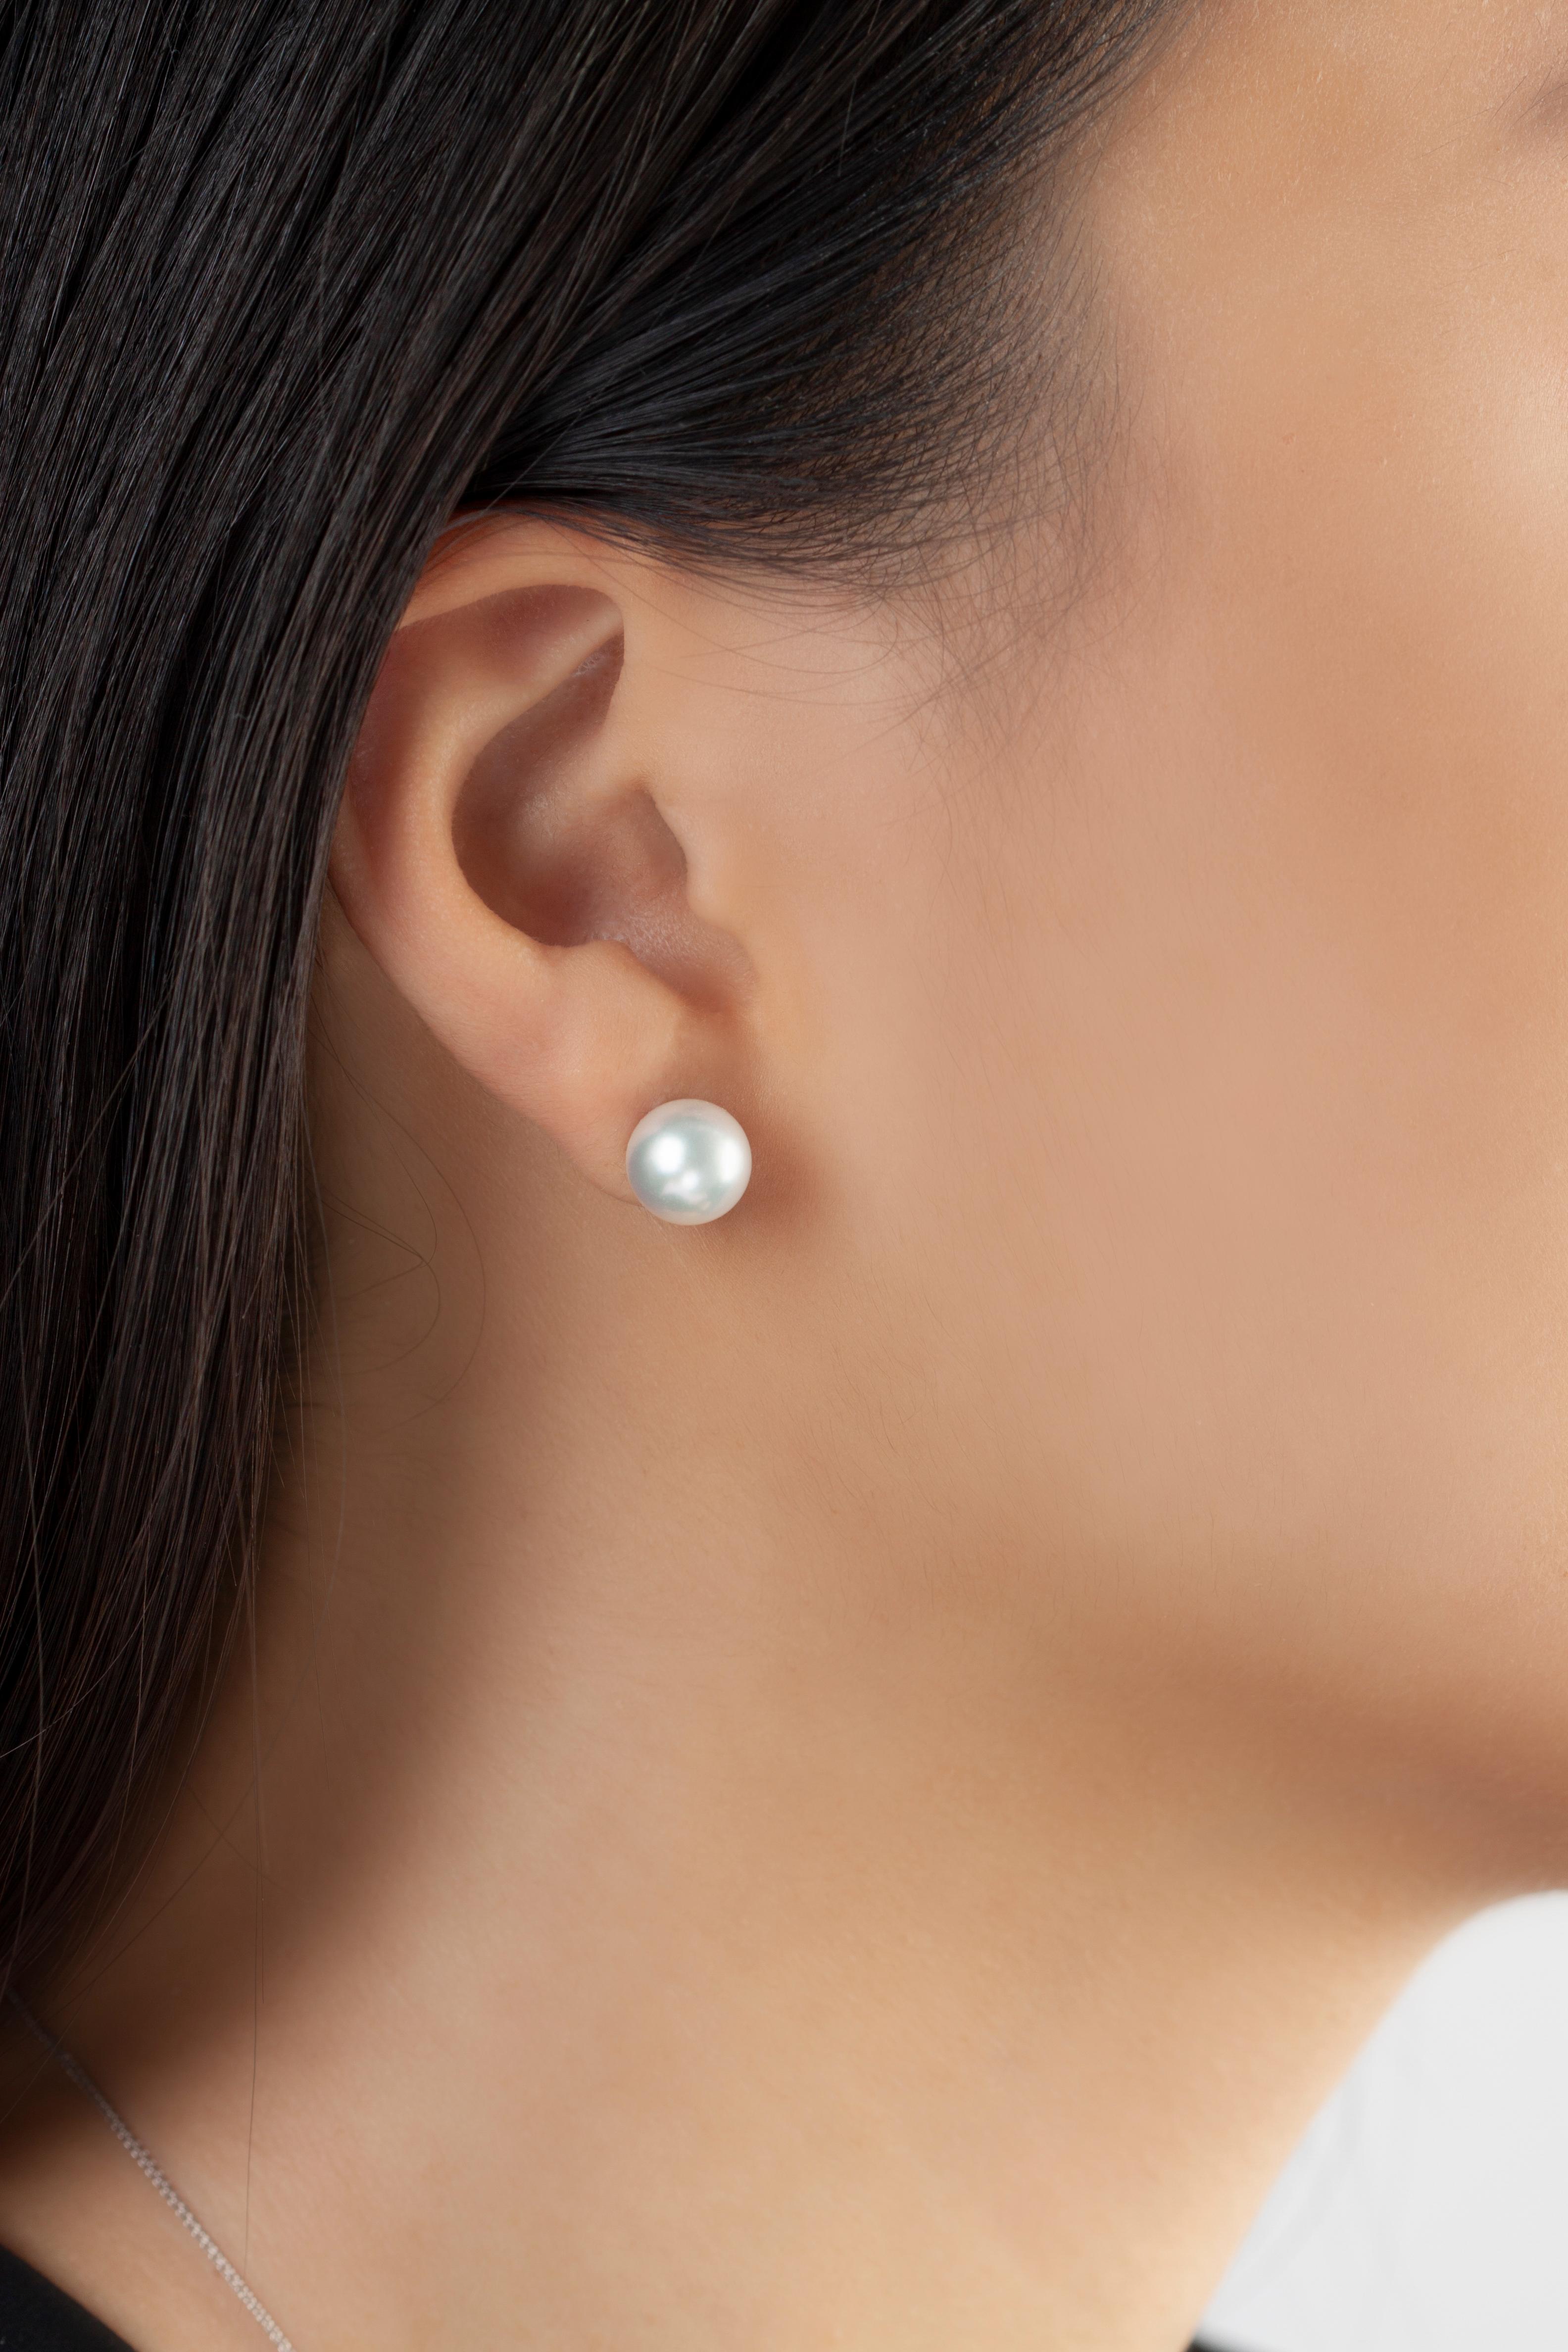 These timeless earrings by Yoko London feature lustrous South Sea pearls. These timeless earrings would make a spectacular addition to any jewellery box; they will add a touch of sophistication to both daytime and evening looks. Additional sizes are